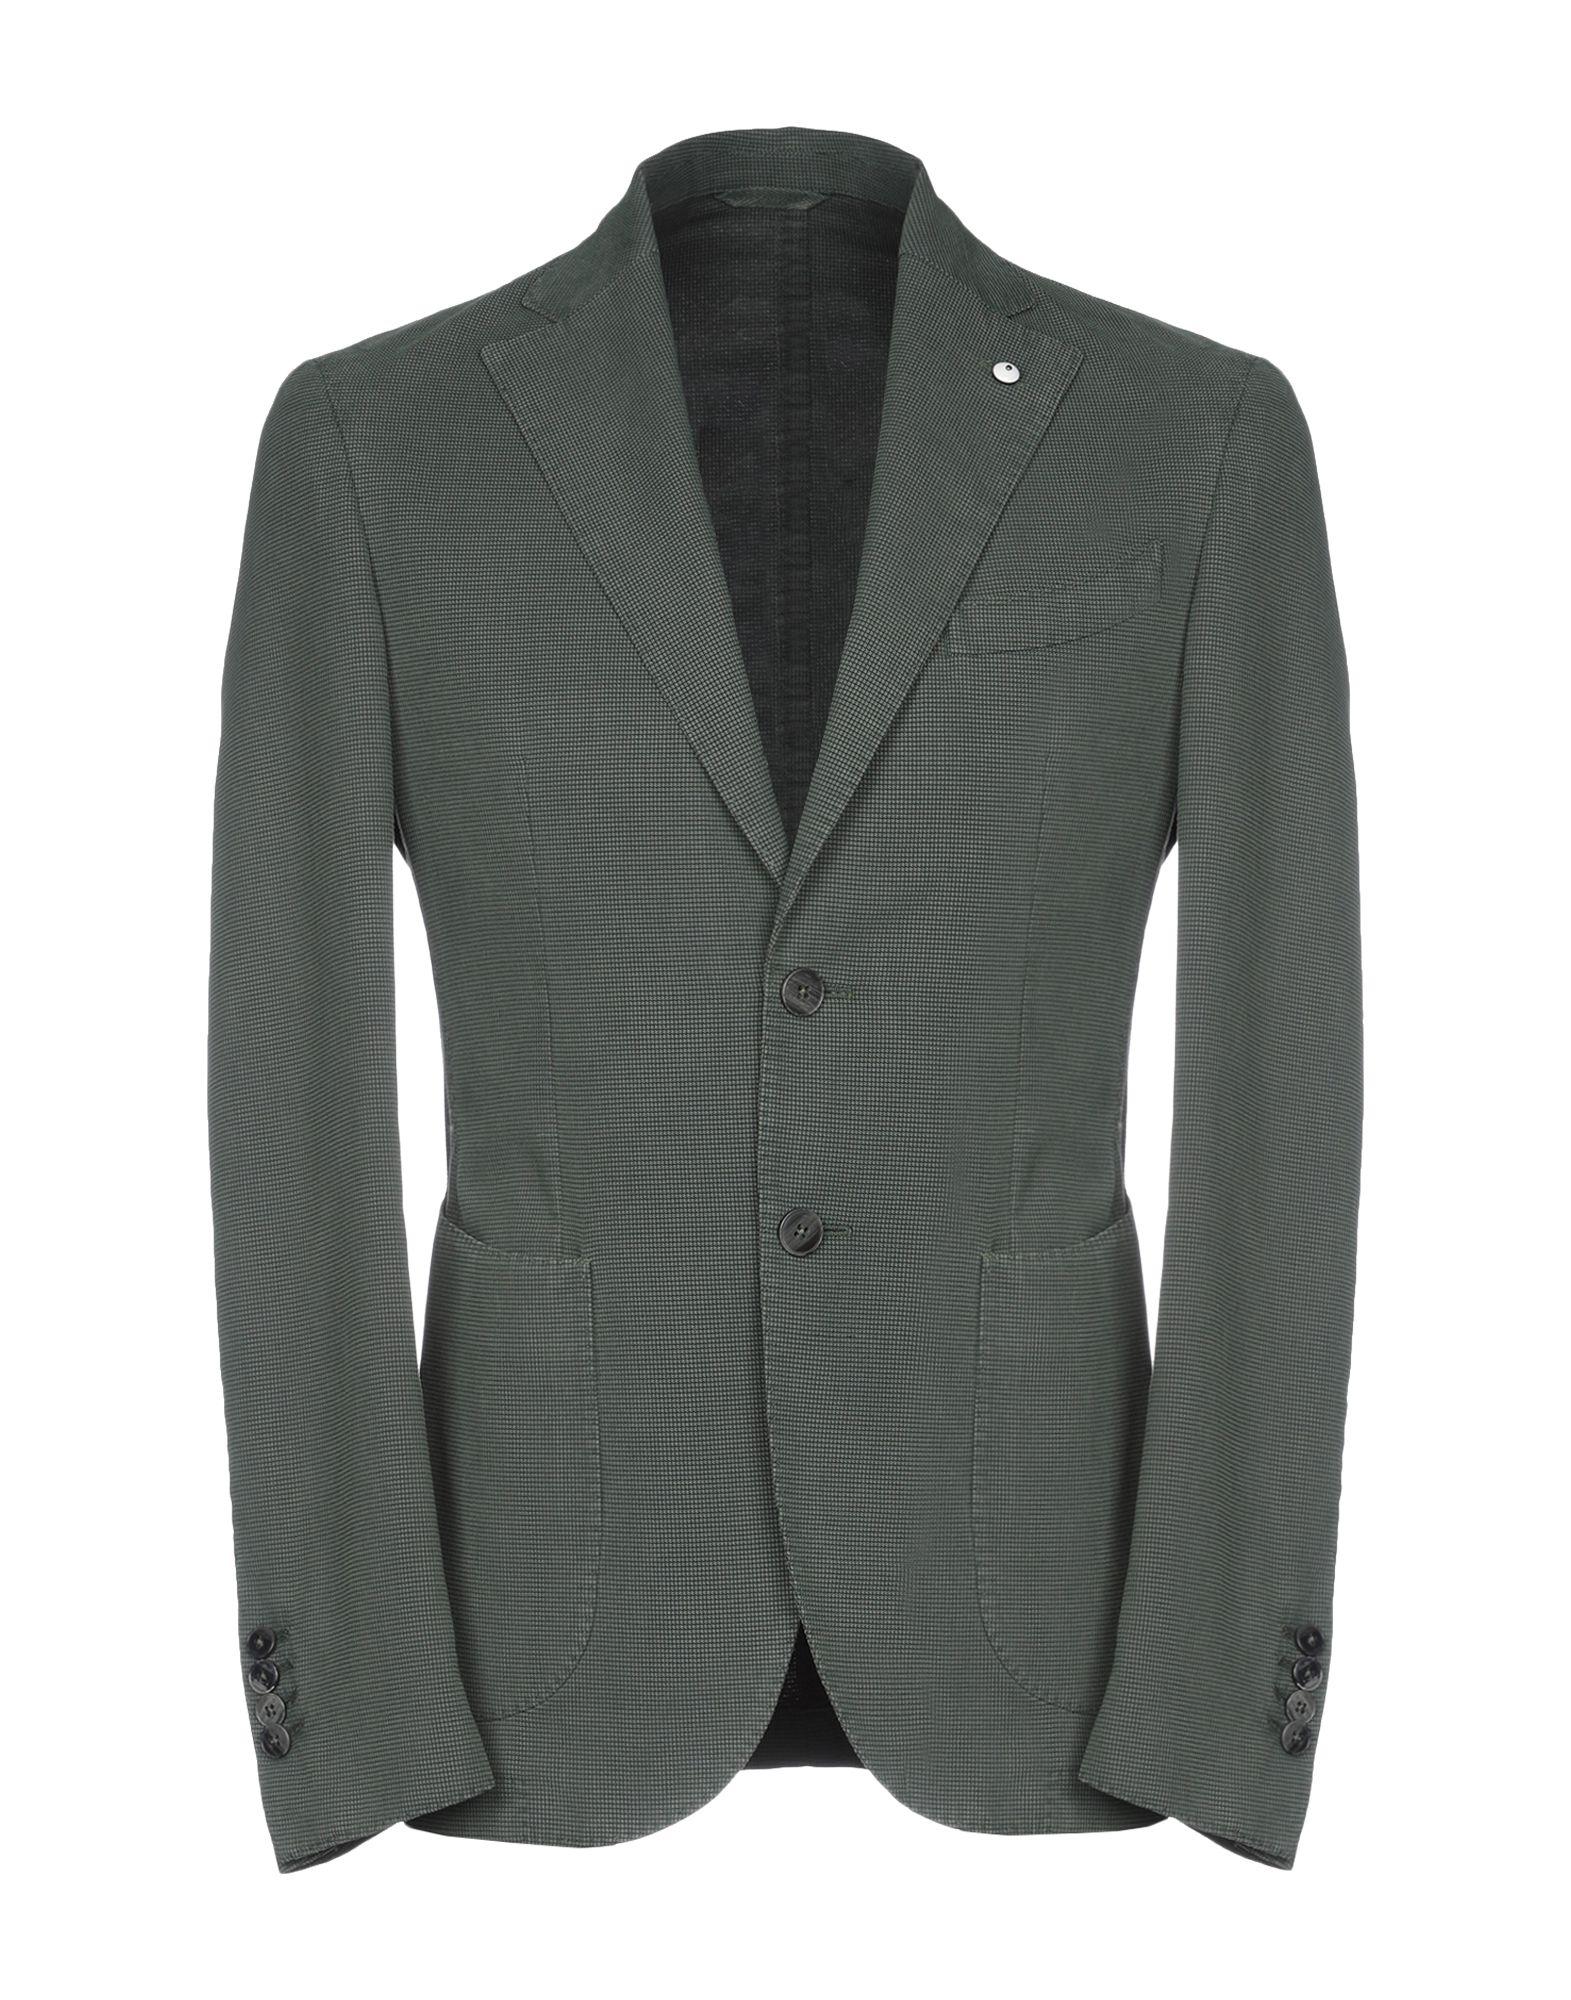 L.B.M. 1911 Cotton Suit Jacket in Green for Men - Lyst